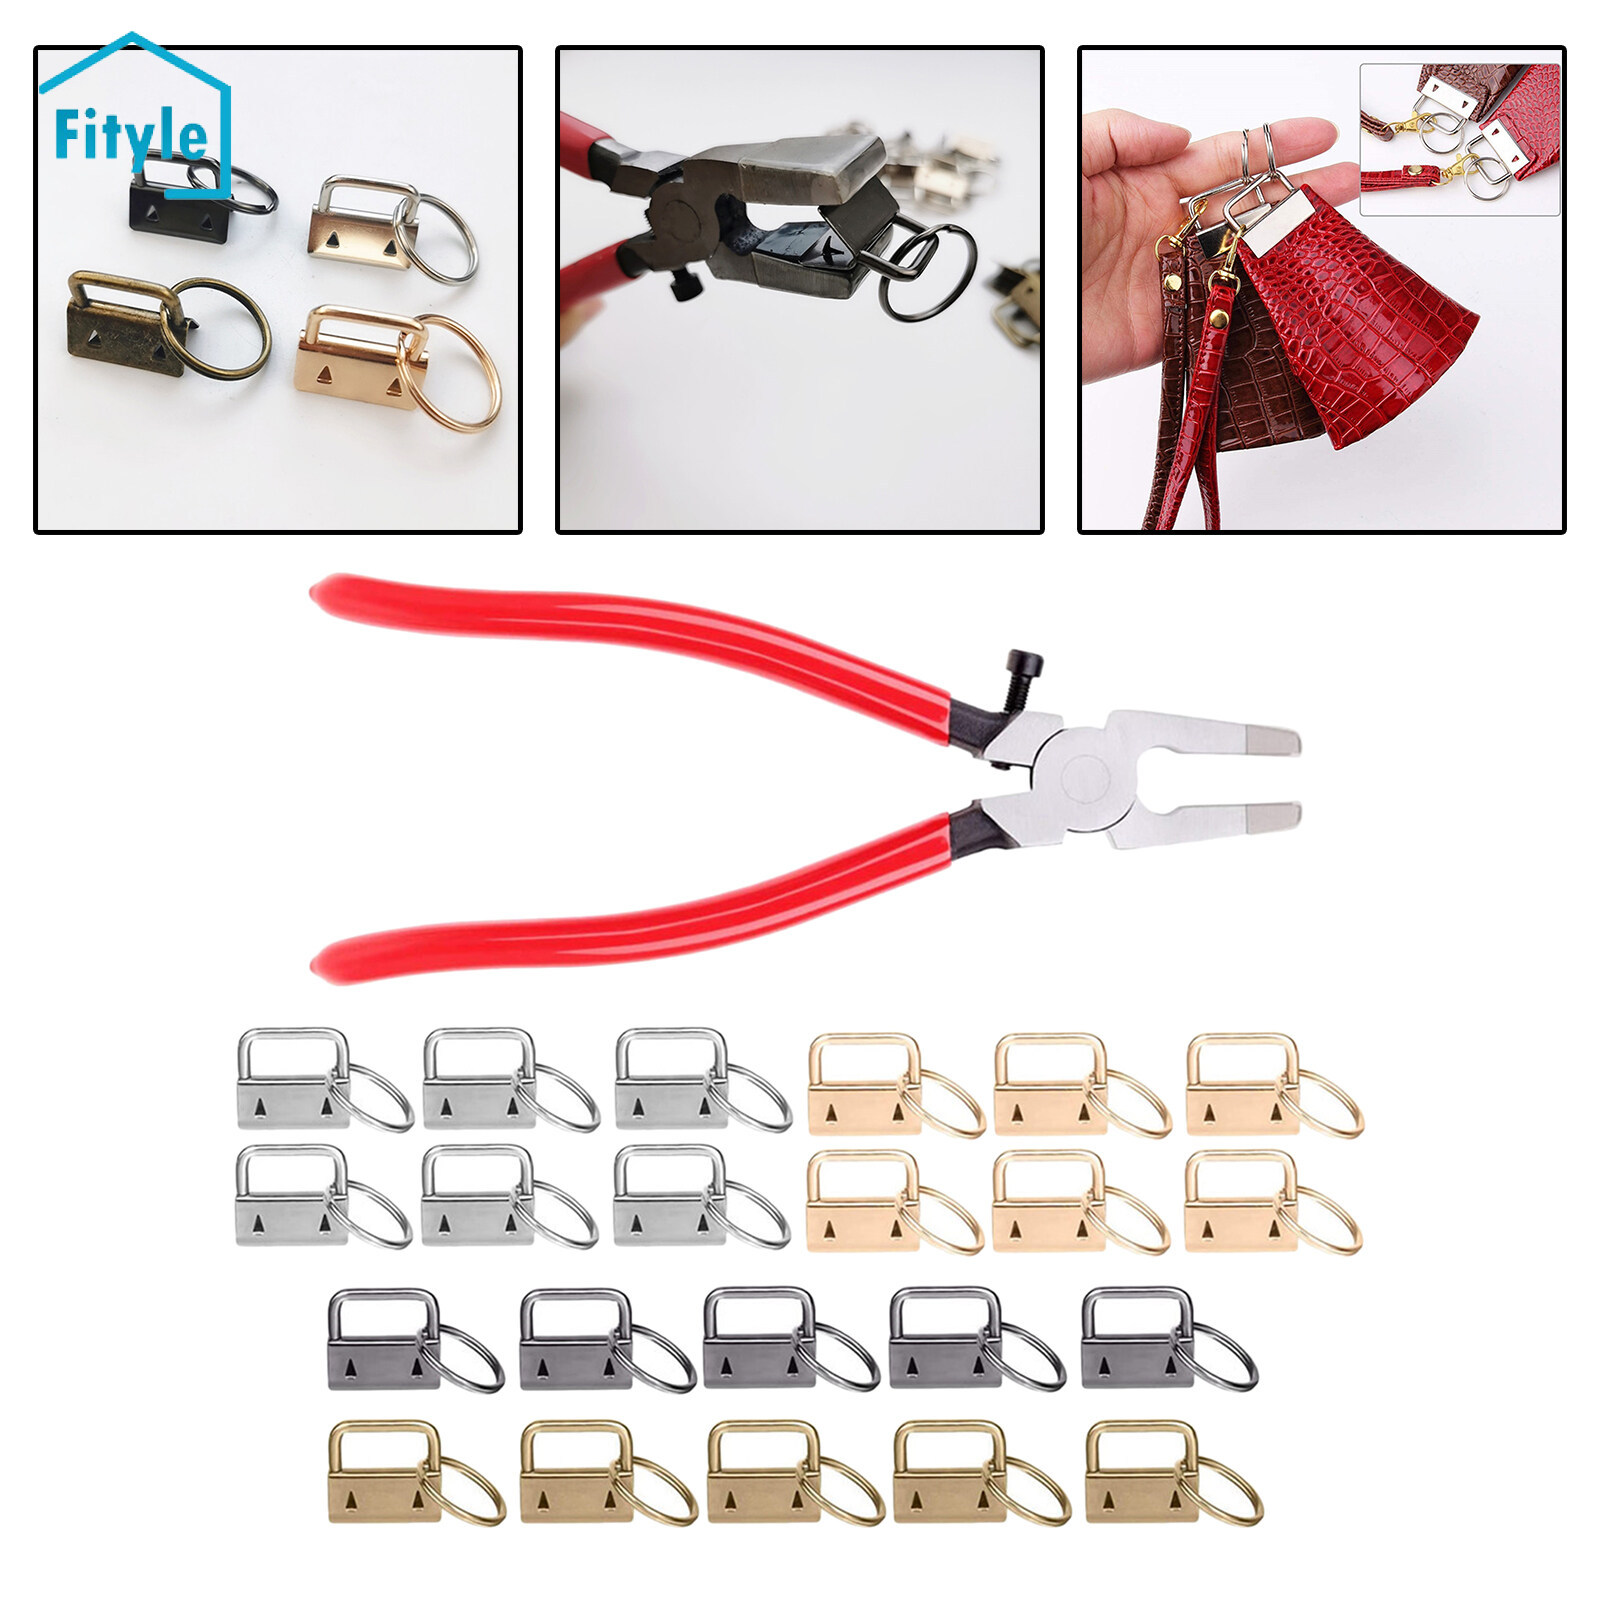 Key Fob Hardware Set, Keychain Hardware With Key Ring And Pliers Tool For  Keychain Wristlet Clamp Webbing Fabric Diy Making Hardware Supplies(1s